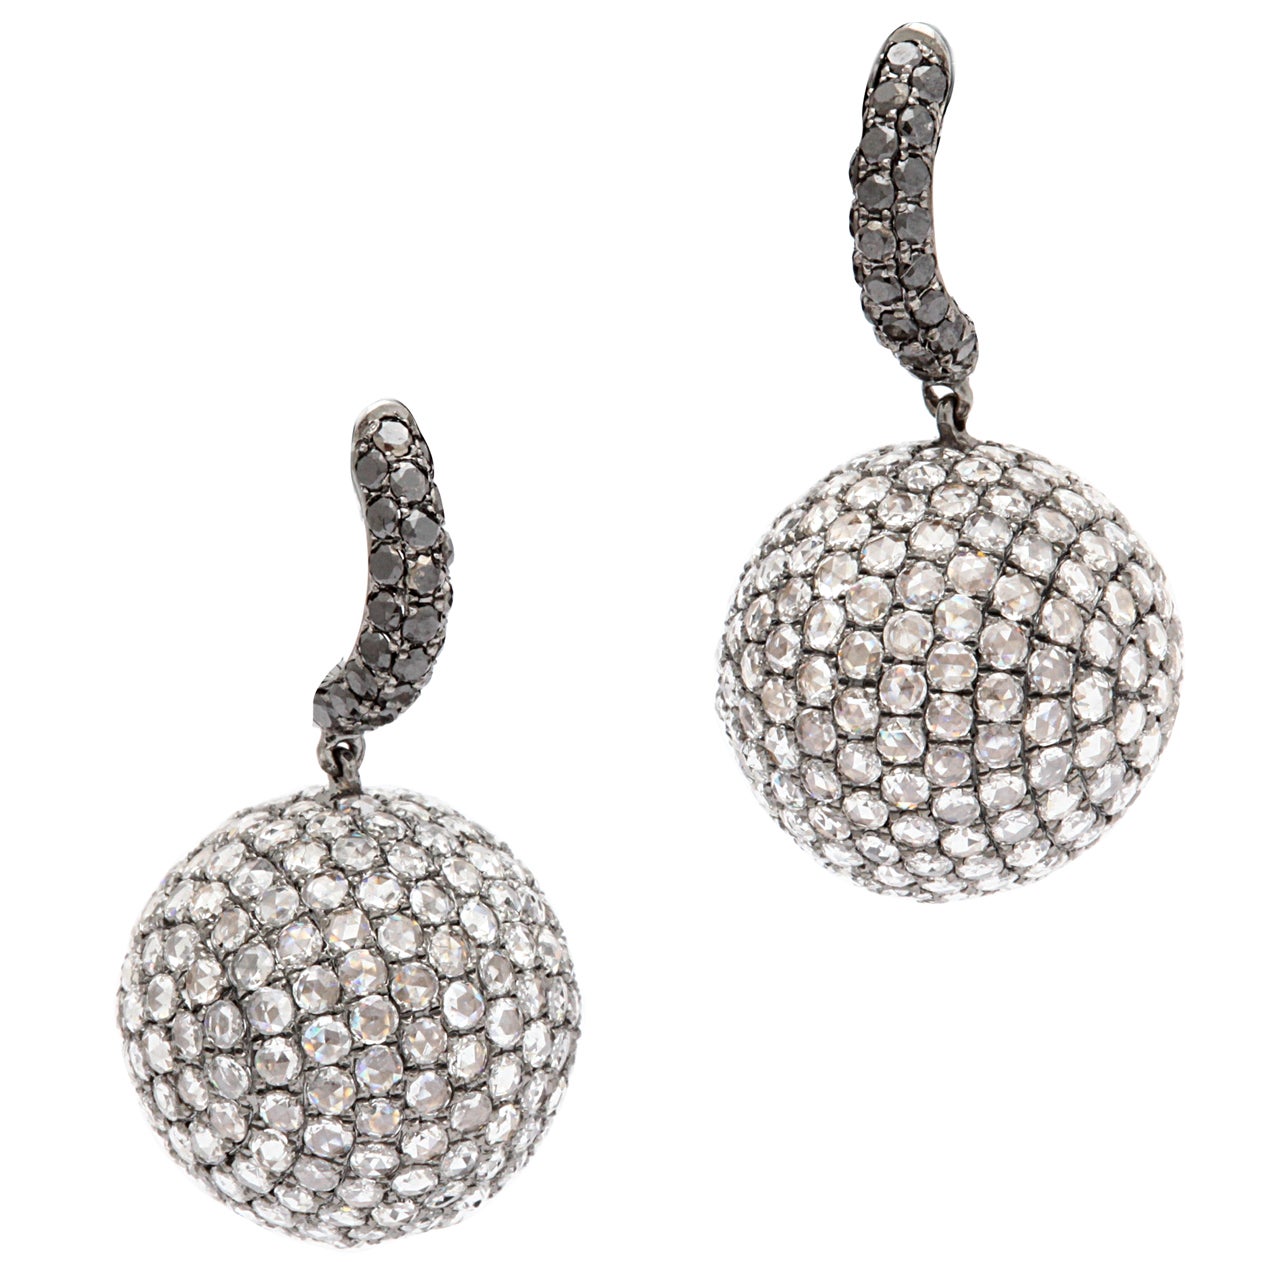 Gold and Diamond Pave Bead Earrings